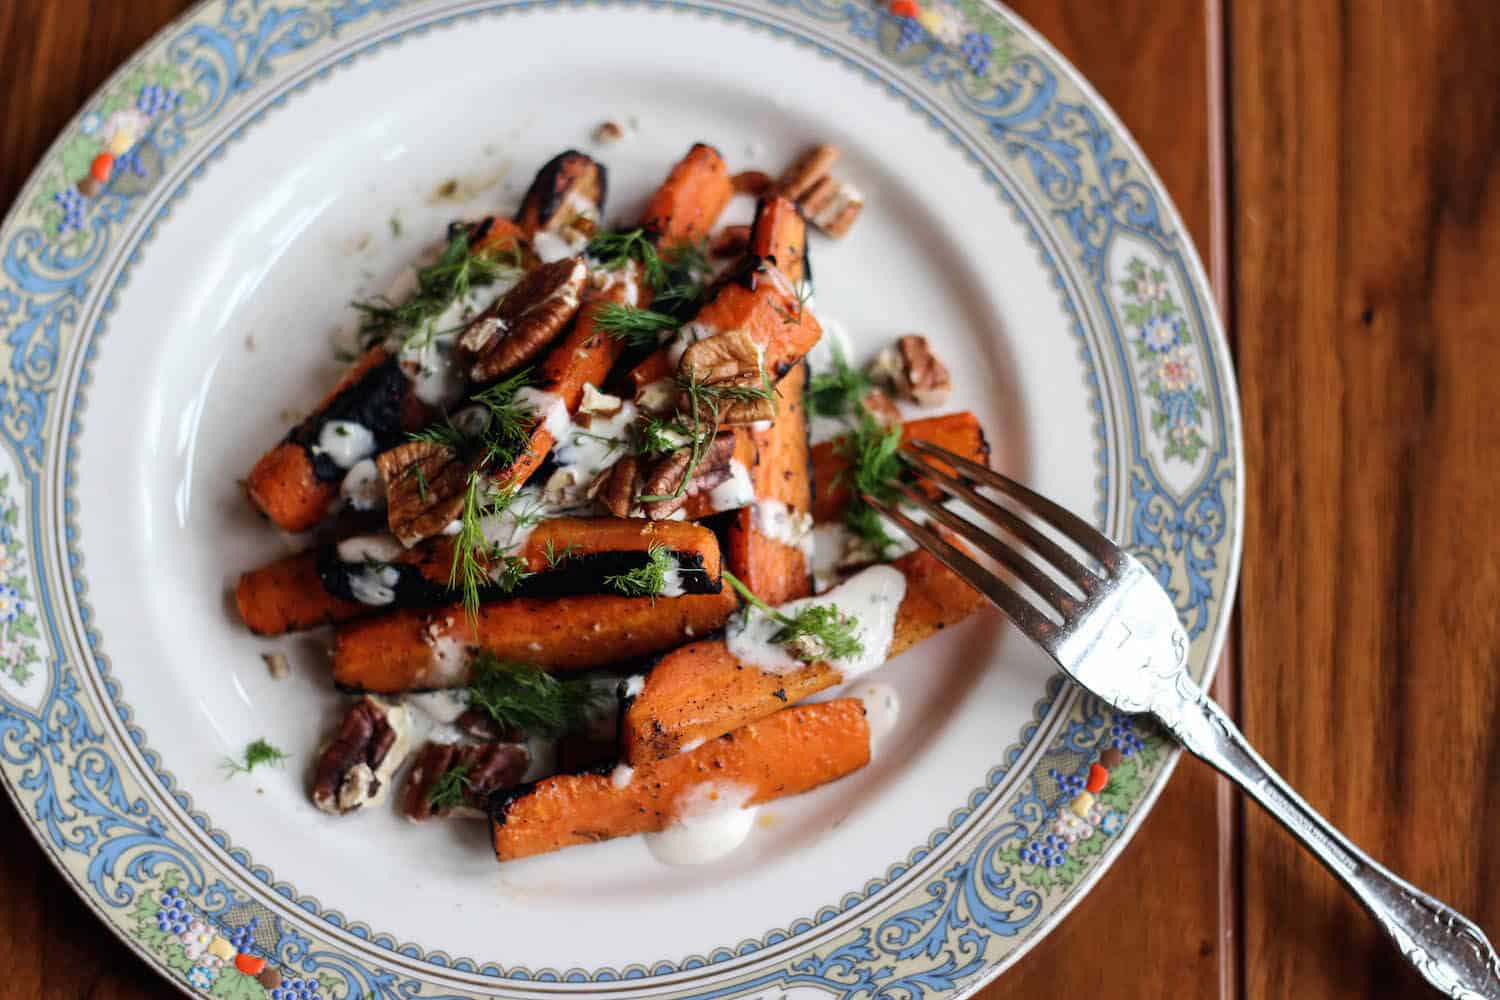 The Publican’s Barbecue Carrots